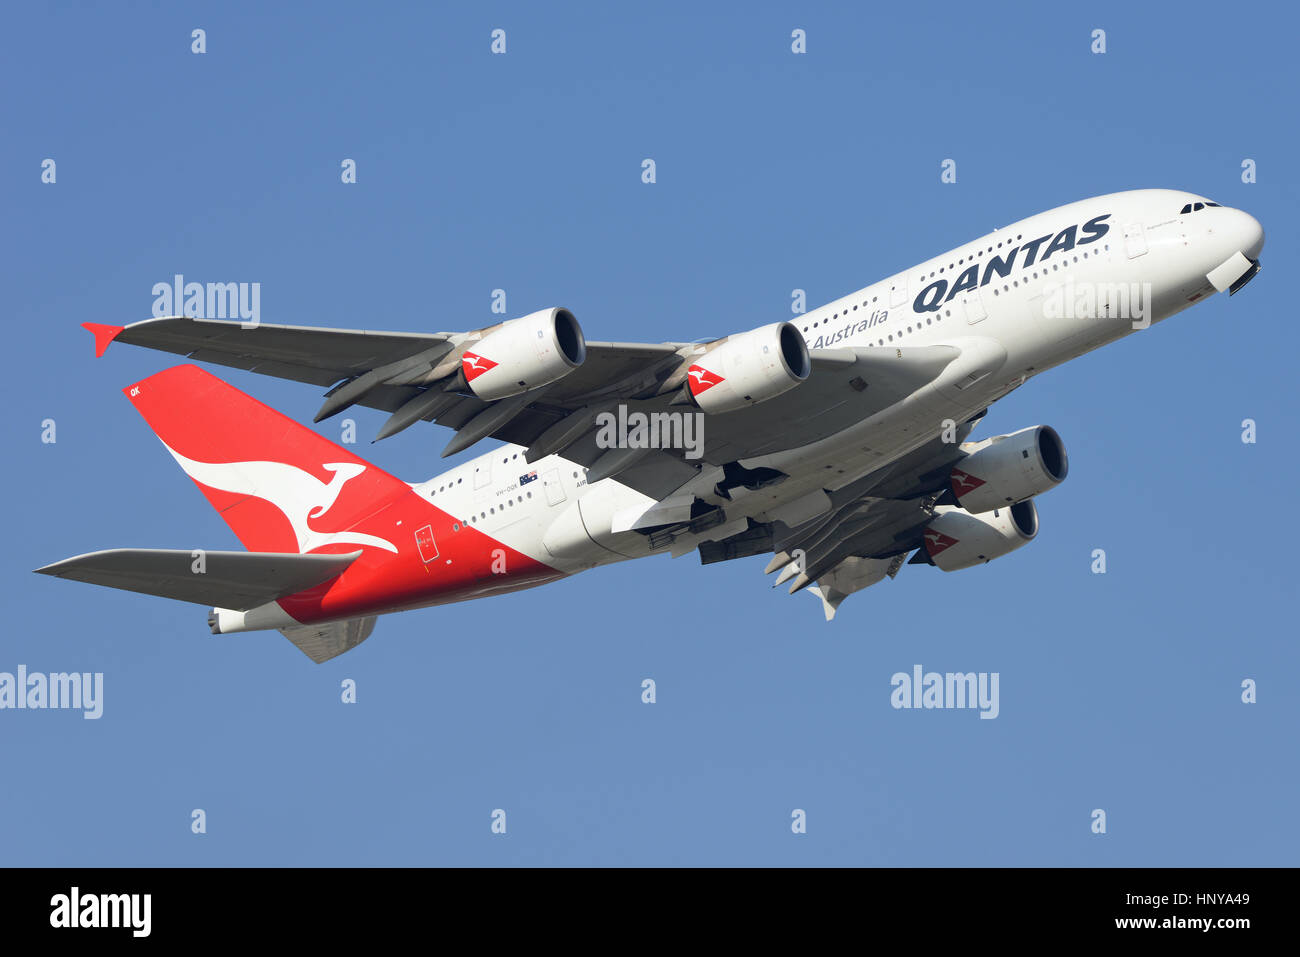 Qantas Airbus A380 -842 jet airliner plane VH-OQK taking off from London Heathrow Airport in blue sky. Space for copy Stock Photo